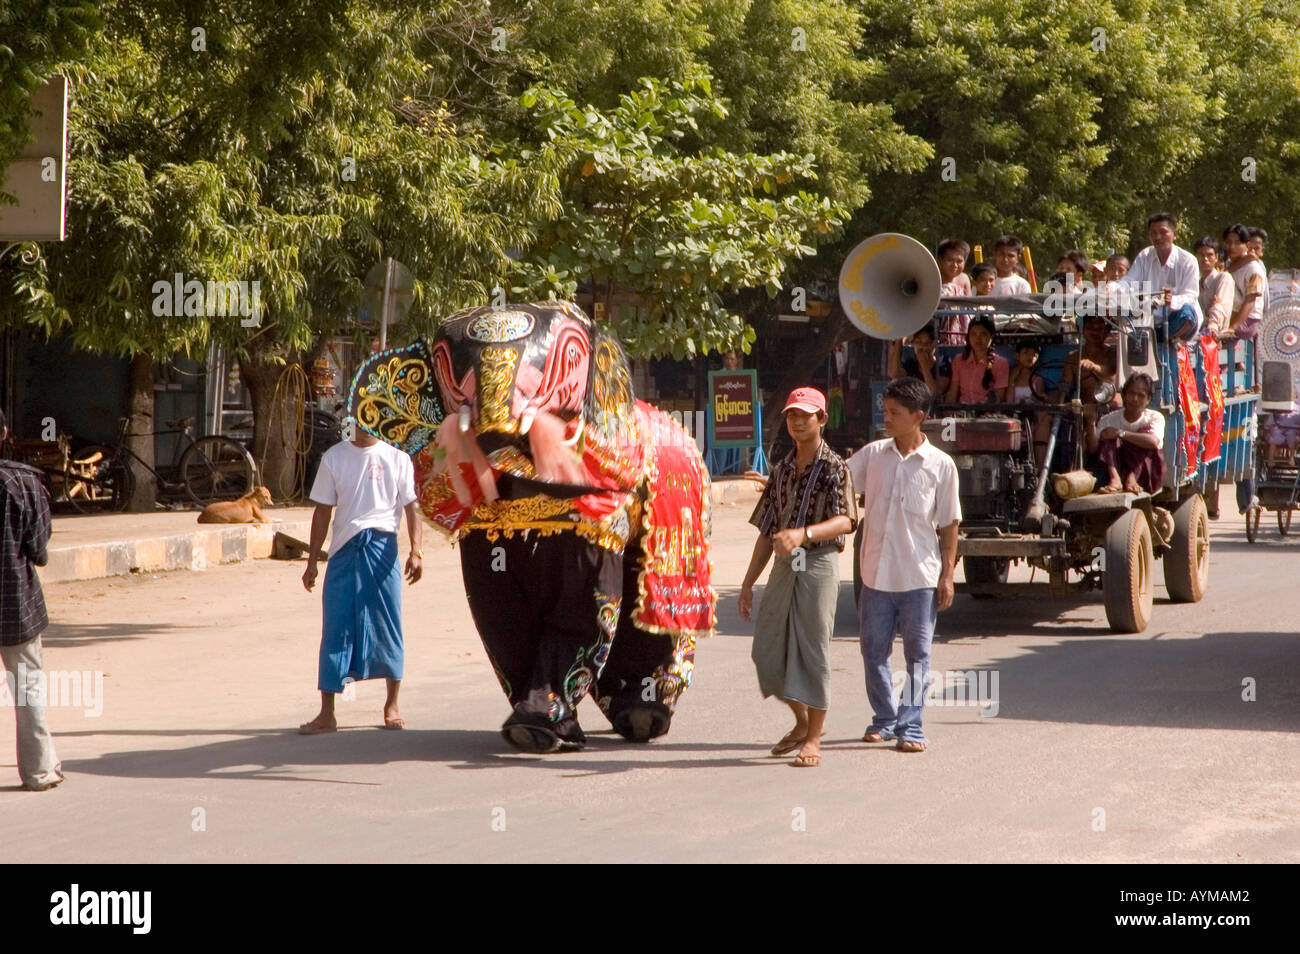 Stock photograph of a papier mache elephant leading a street parade at Monywa in Myanmar 2006 Stock Photo